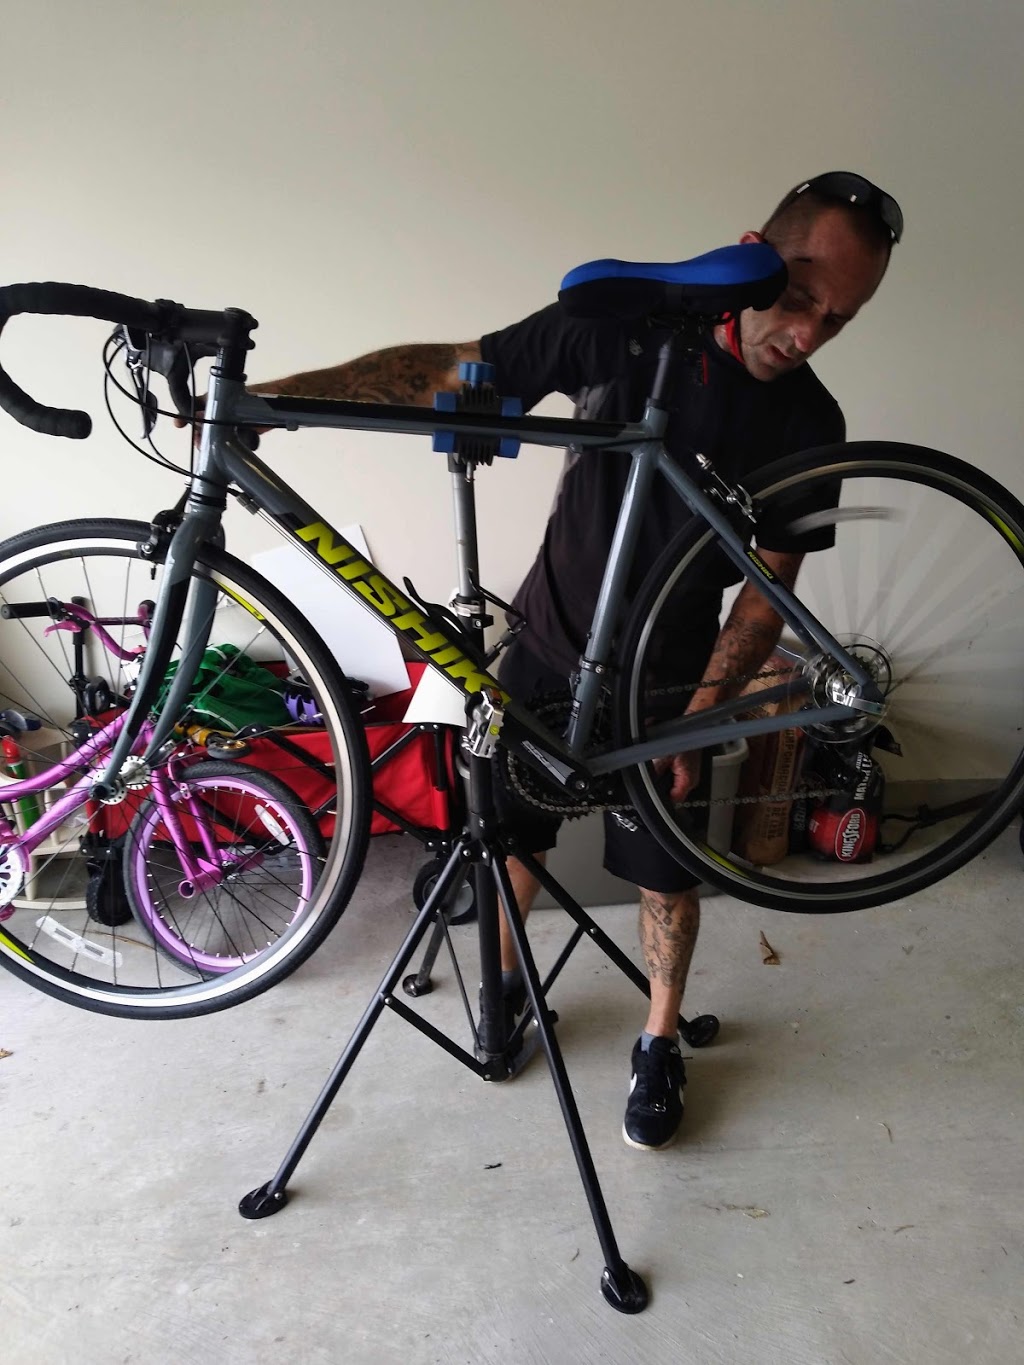 Spring Mobile Bicycle Repair | 990 Cypress Station Dr #3607, Houston, TX 77090, USA | Phone: (281) 965-1551